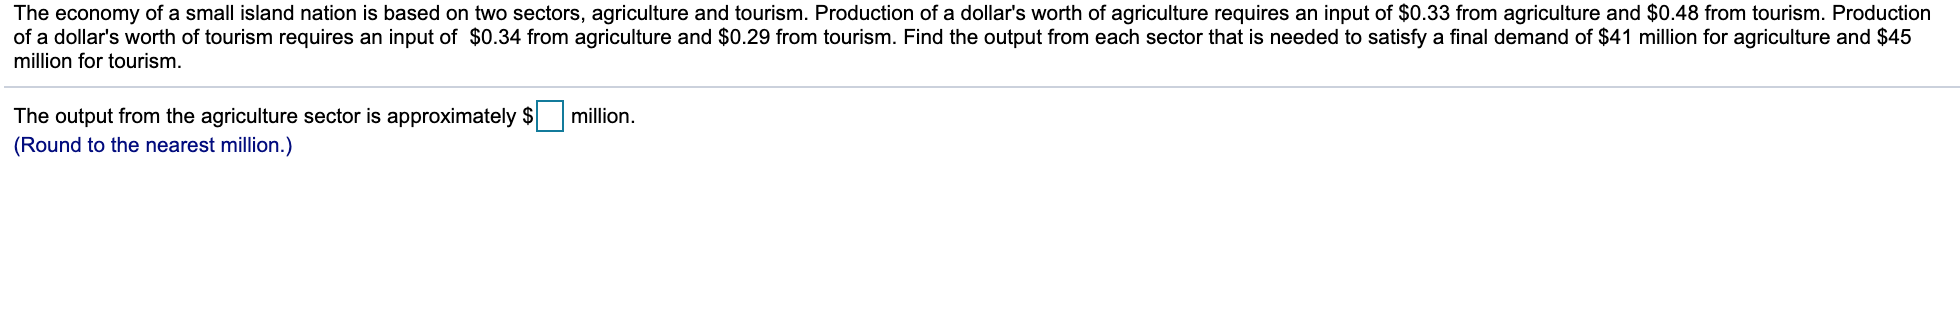 The economy of a small island nation is based on two sectors, agriculture and tourism. Production of a dollar's worth of agriculture requires an input of $0.33 from agriculture and $0.48 from tourism. Production
of a dollar's worth of tourism requires an input of $0.34 from agriculture and $0.29 from tourism. Find the output from each sector that is needed to satisfy a final demand of $41 million for agriculture and $45
million for tourism.
The output from the agriculture sector is approximately $ million.
(Round to the nearest million.)
